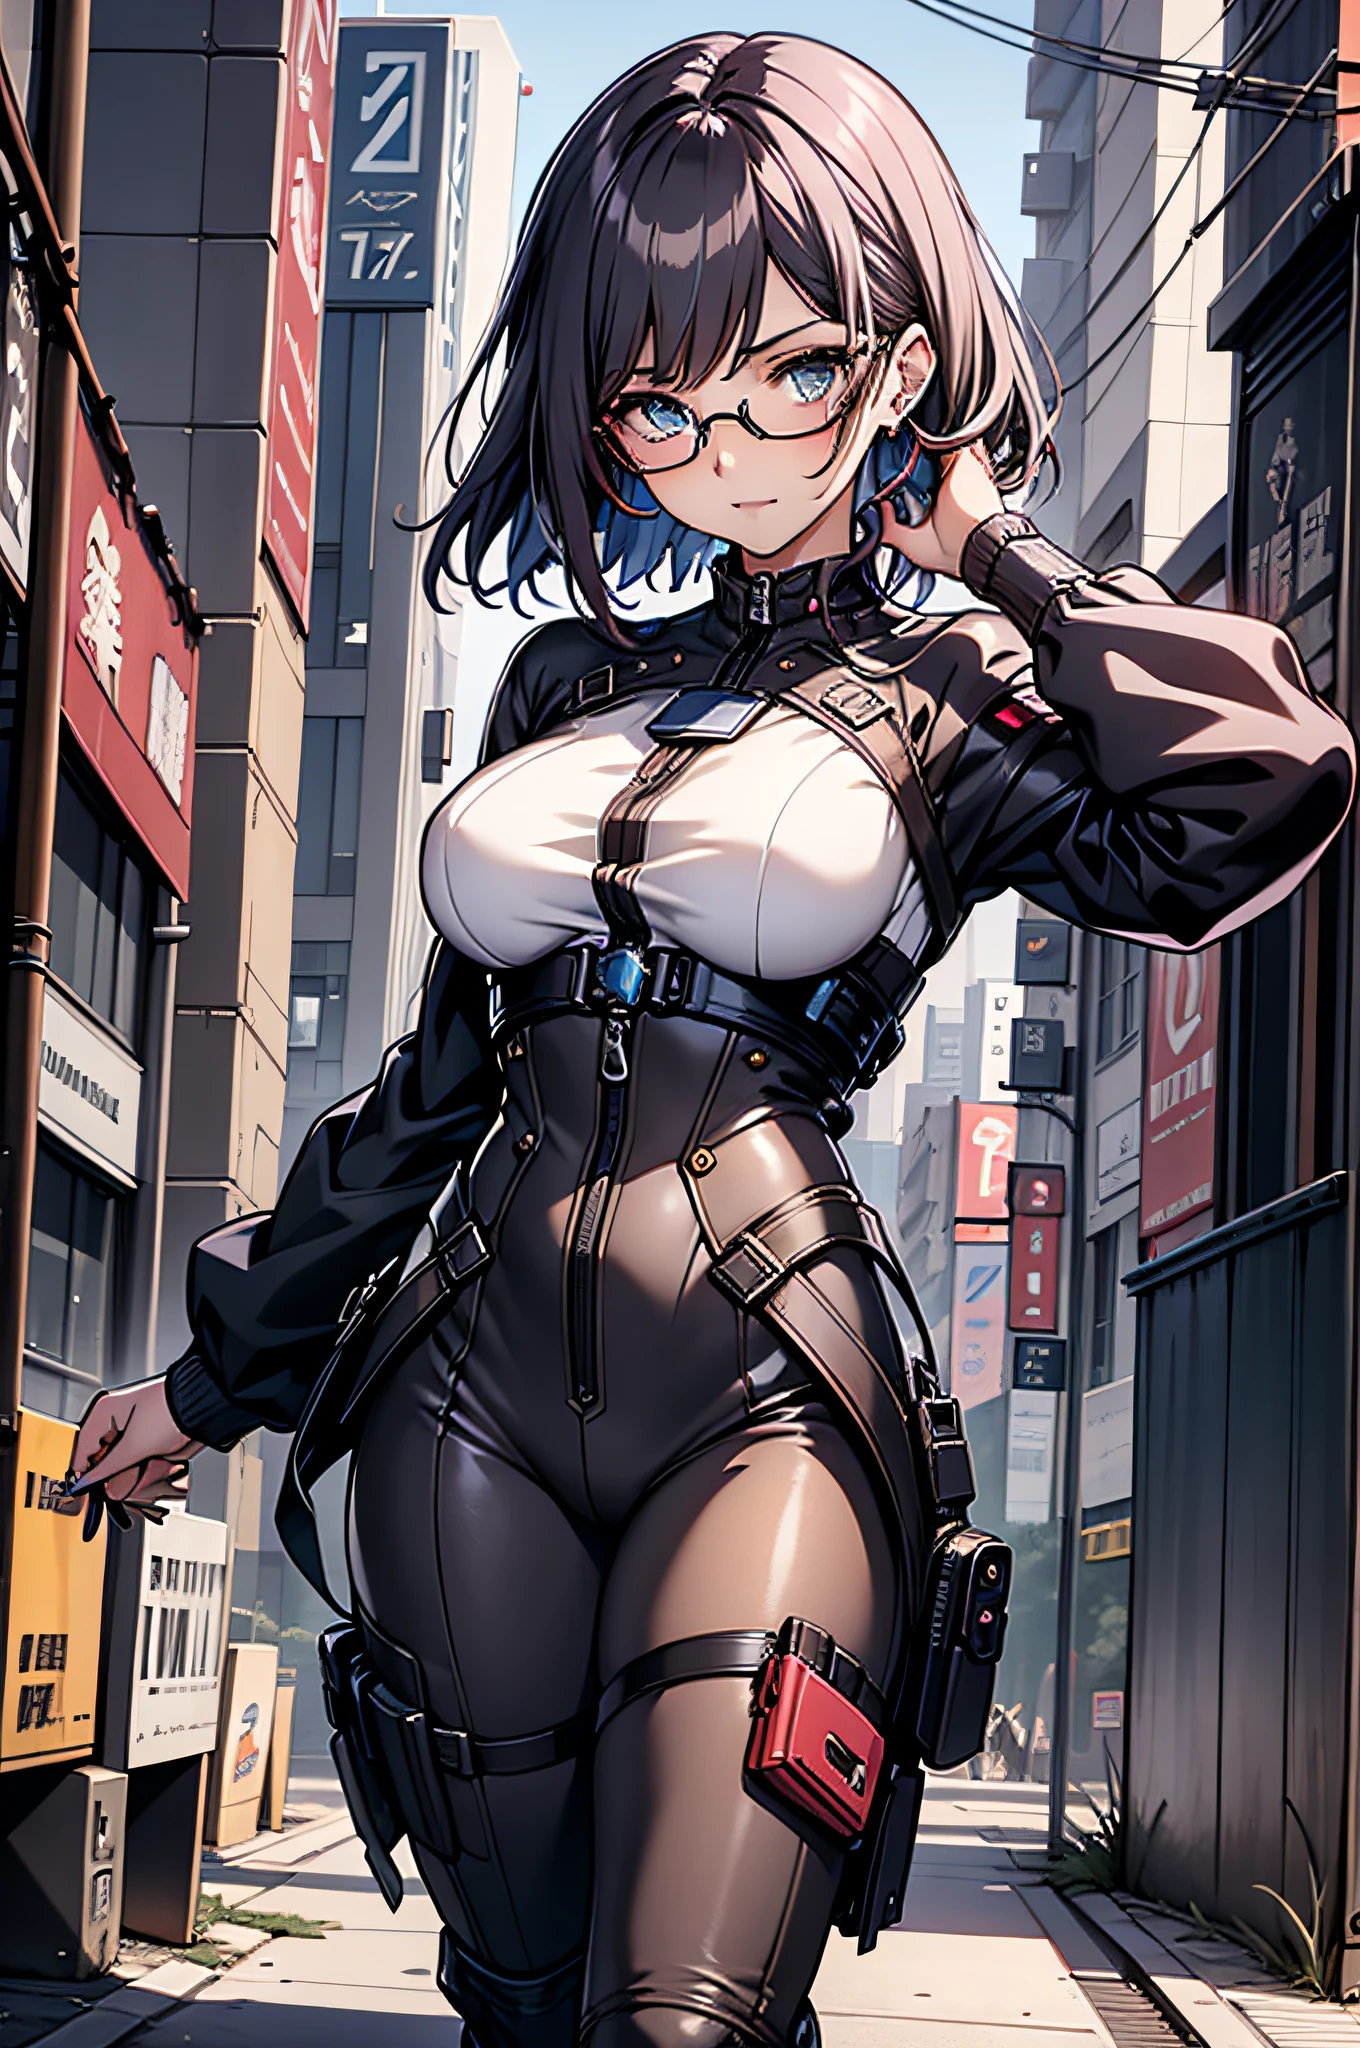 Anime - imagem de estilo 1mulher com olhos azuis e Bblack hair, Bblack hair, thick eyebrow, face of a 27 year old woman, 27 year old young man, cloused mouth, fully body, cyberpunk anime art, (cloused mouth: 1.5), (double eyelid), (Bblack hair: 1.3), (shorth hair: 1.3), wearing dress, digital cyberpunk anime art, cyberpunk anime art, range murata and artgerm, eyeglass, futuristic clothing, (whole body: 1.7), wearing dress, stylish pants, Technological dress, transparent spectacle lenses, 极其详细的Artgerm, modern cyberpunk anime, artgerm and atey ghailan, artgerm and genzoman, cloused mouth